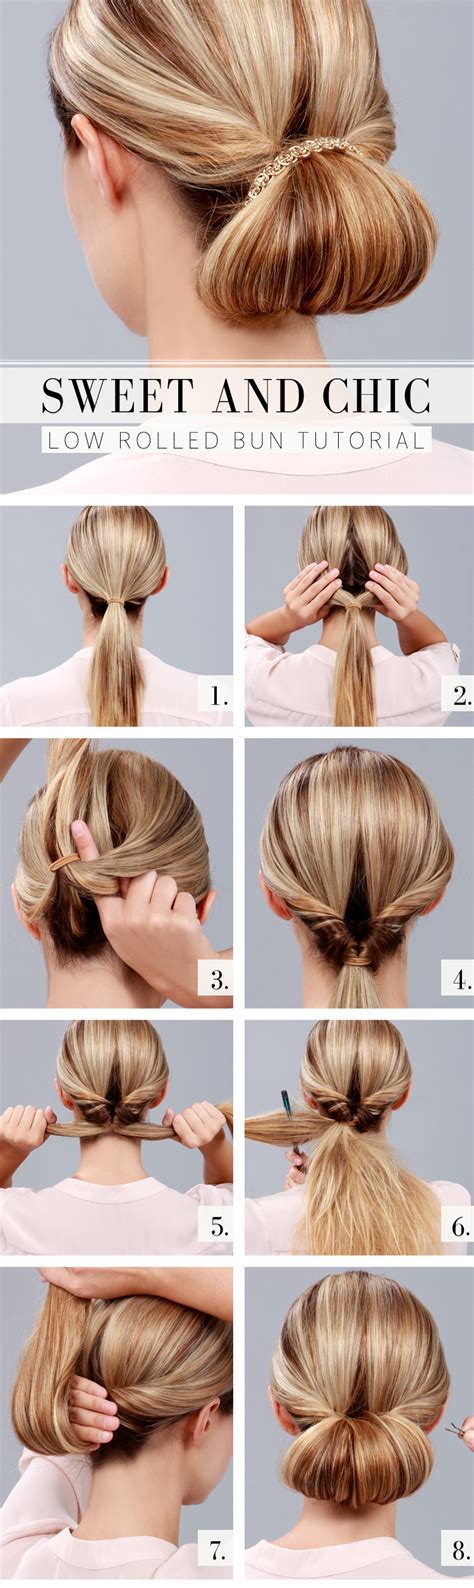 15 Step By Step Hairstyle Tutorials You Need To Try Now